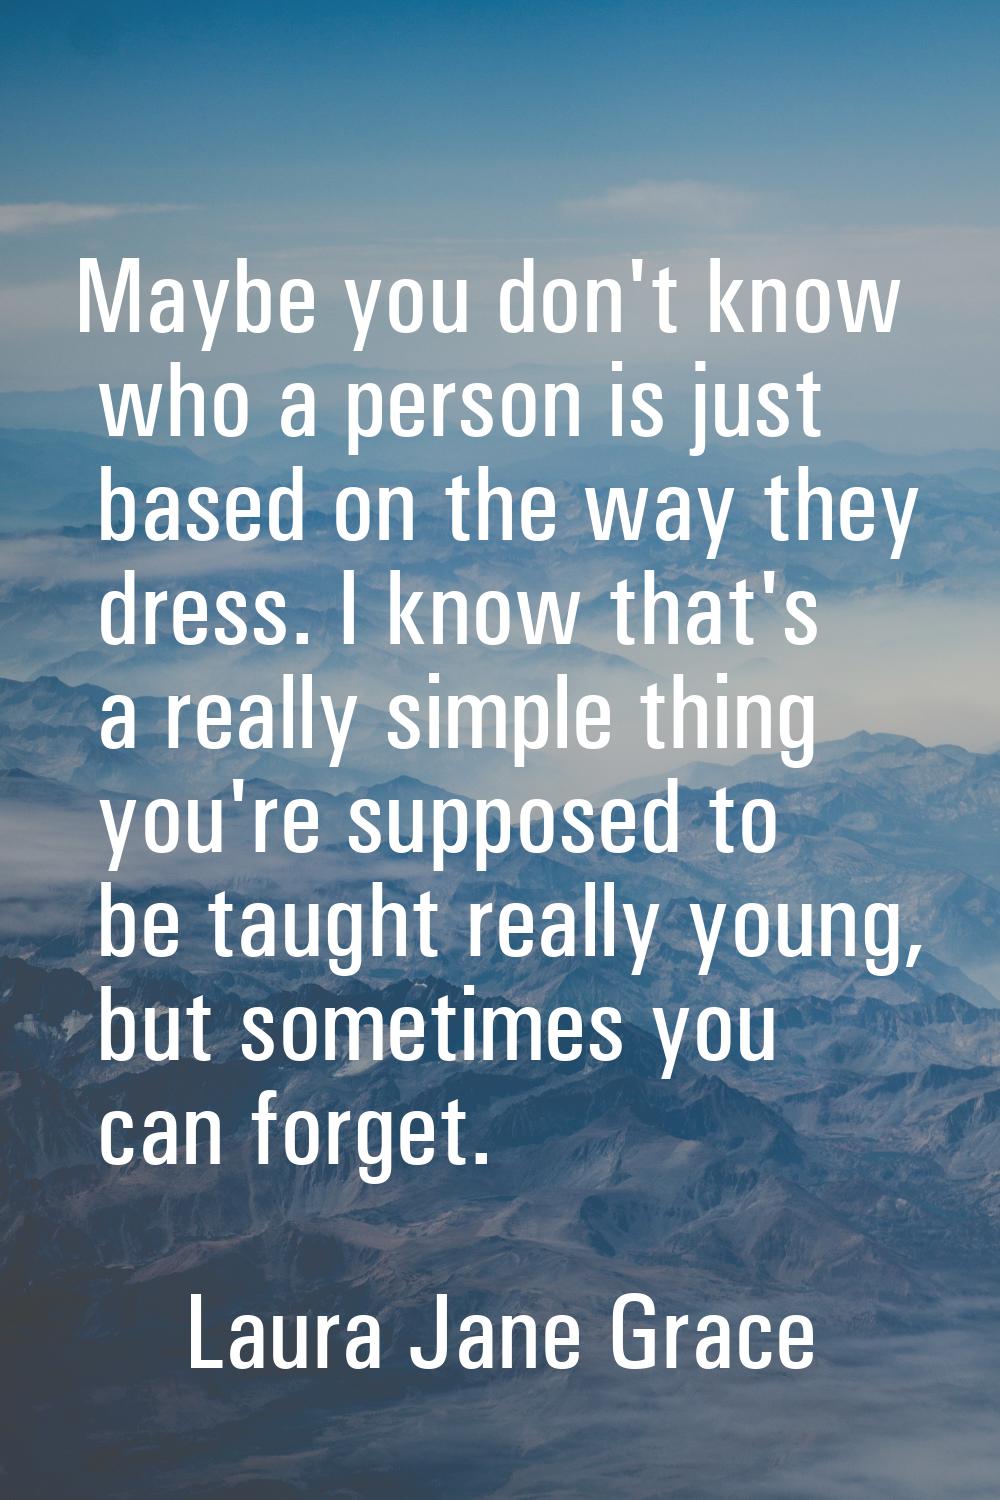 Maybe you don't know who a person is just based on the way they dress. I know that's a really simpl